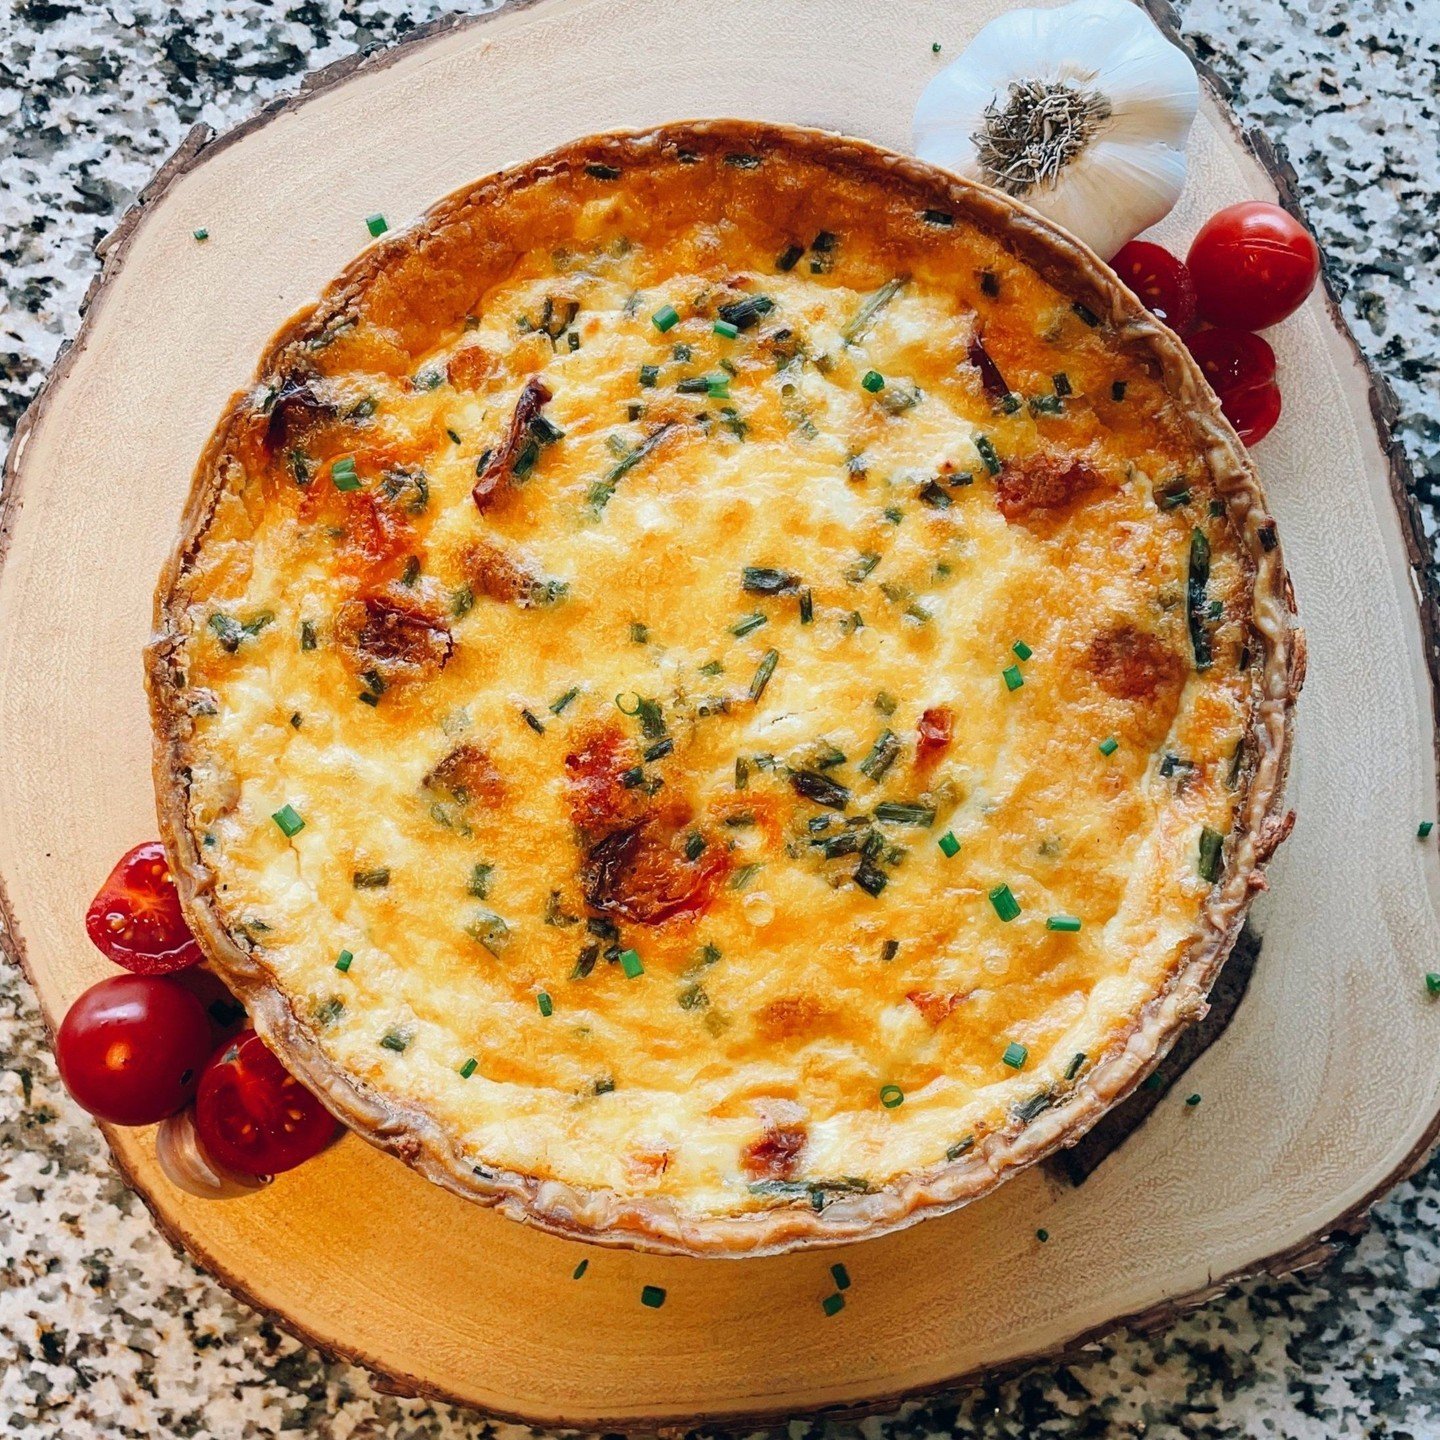 Bring Mother's Day brunch to the next level with our Roasted Tomato and Ch&egrave;vre Quiche, only available on our Mother's Day menu! Order on our website at nrbakery.com/mothers-day.